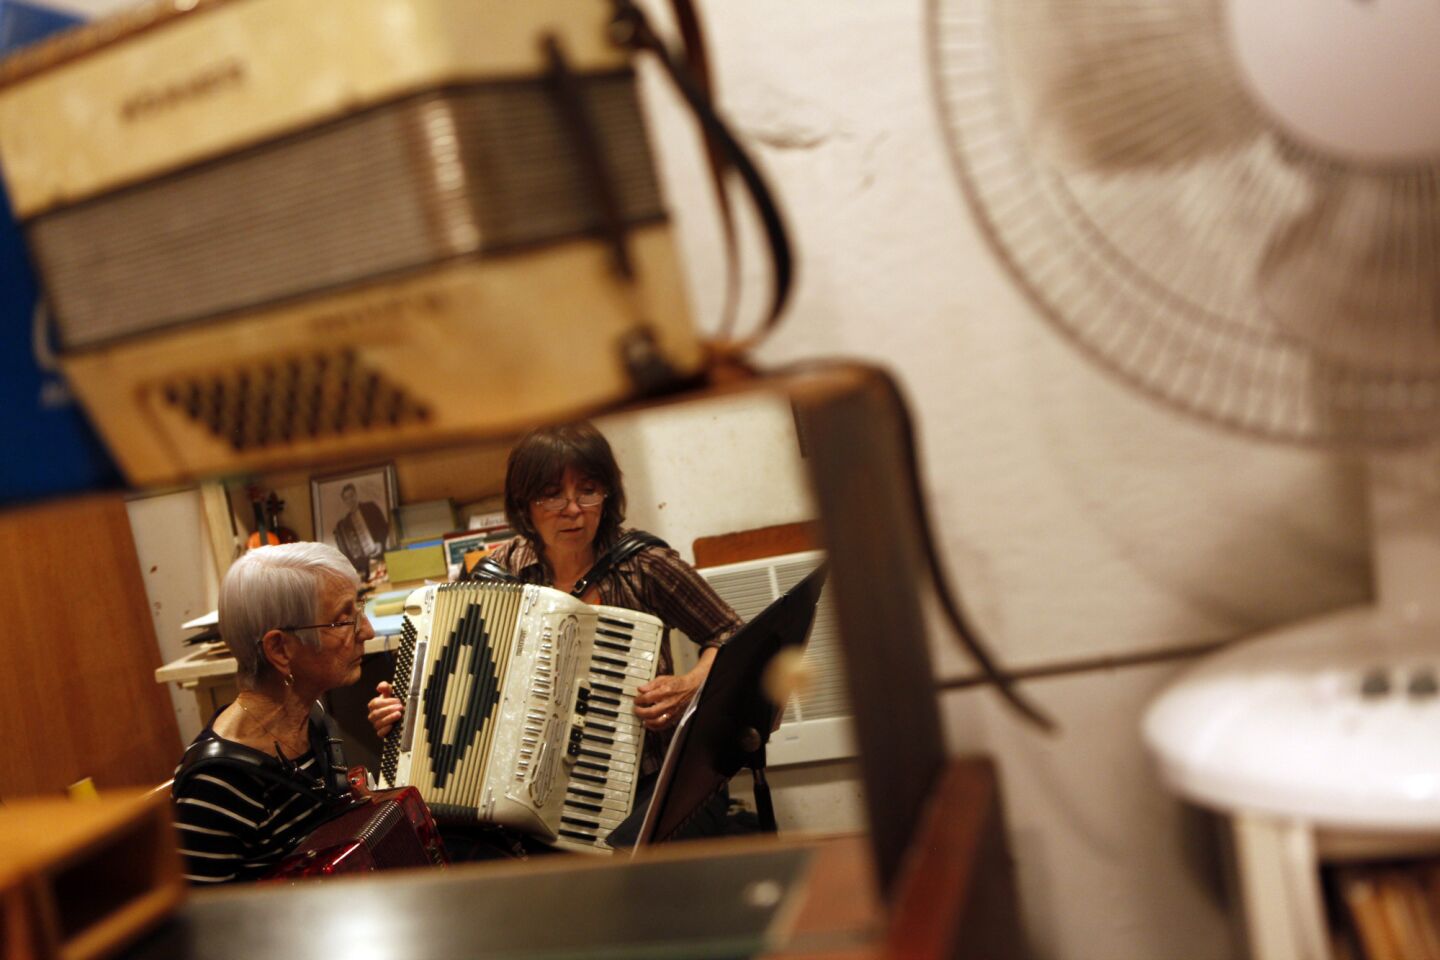 Veronika Caballero, right, wife of owner Dave Caballero, teaches Emily Gaughenbaugh, 92, how to play the accordion while caught in a reflection at Dave's Accordion School in Atwater Village. Gaughenbaugh said she took up the instrument a couple of months ago, in part because it beats doing crossword puzzles.